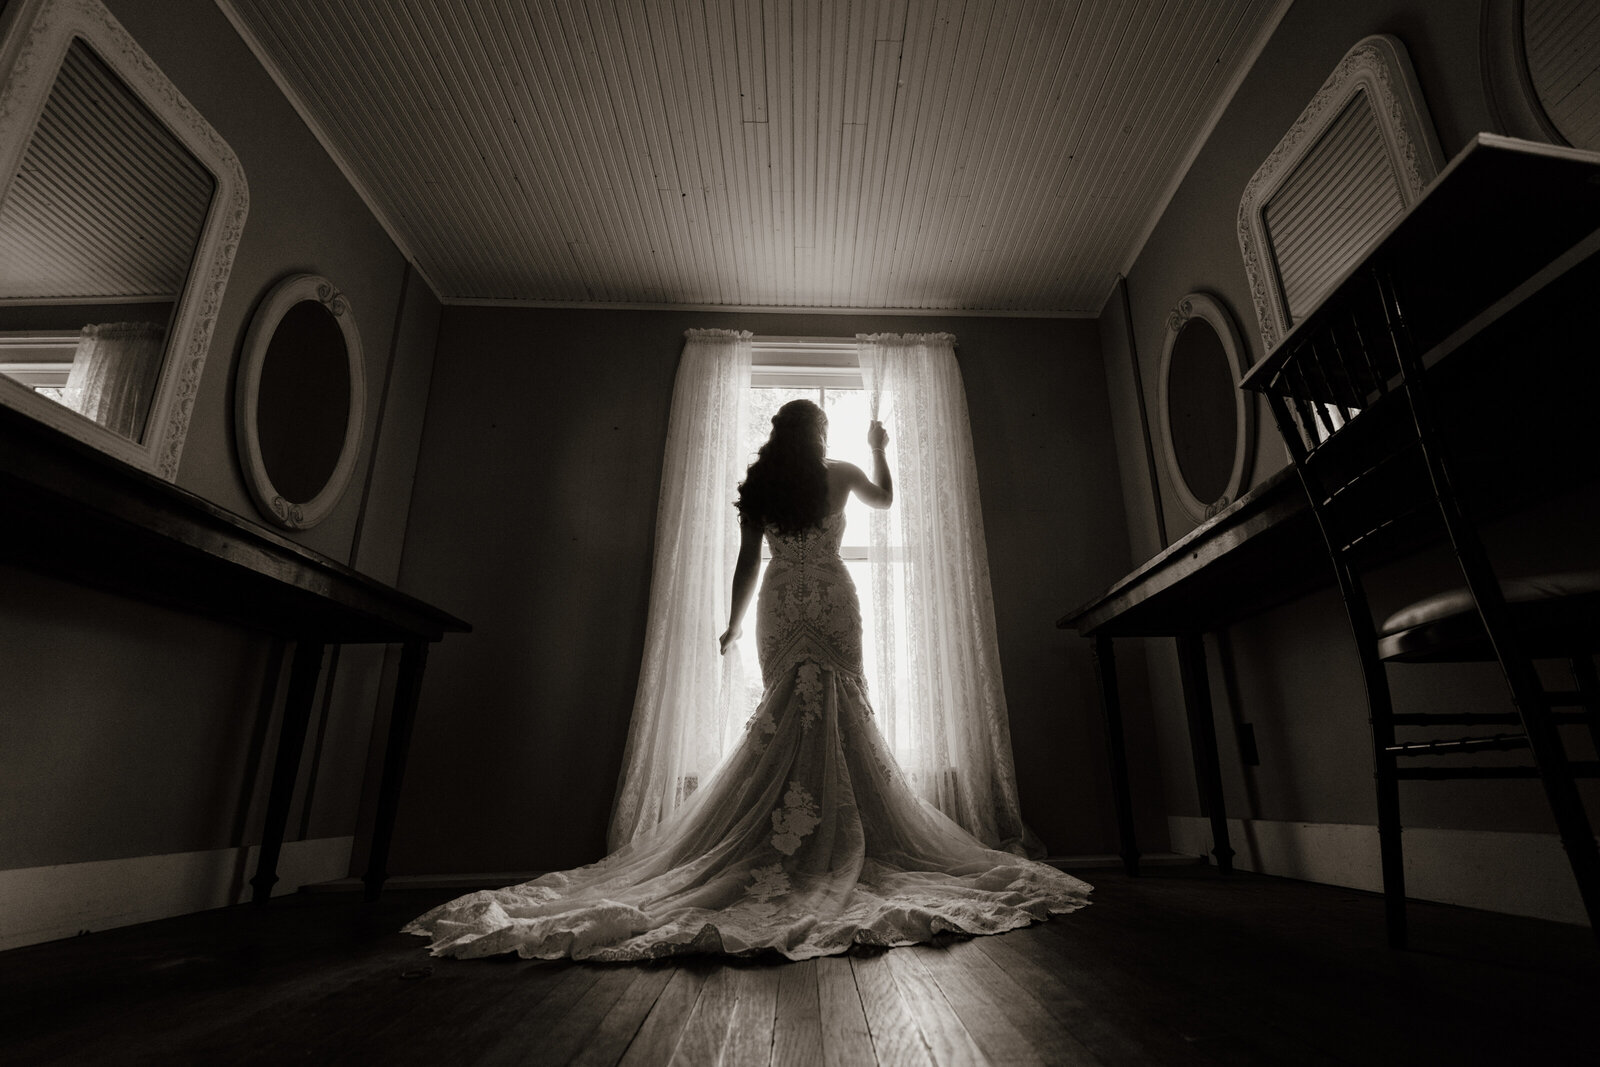 003-Millennium-Moments_Chicago_Wedding_Photographer_Bella-Sposa_Dress_Ruffled-Feathers-Venue_Bridal-Suite_Getting-Ready-Photos